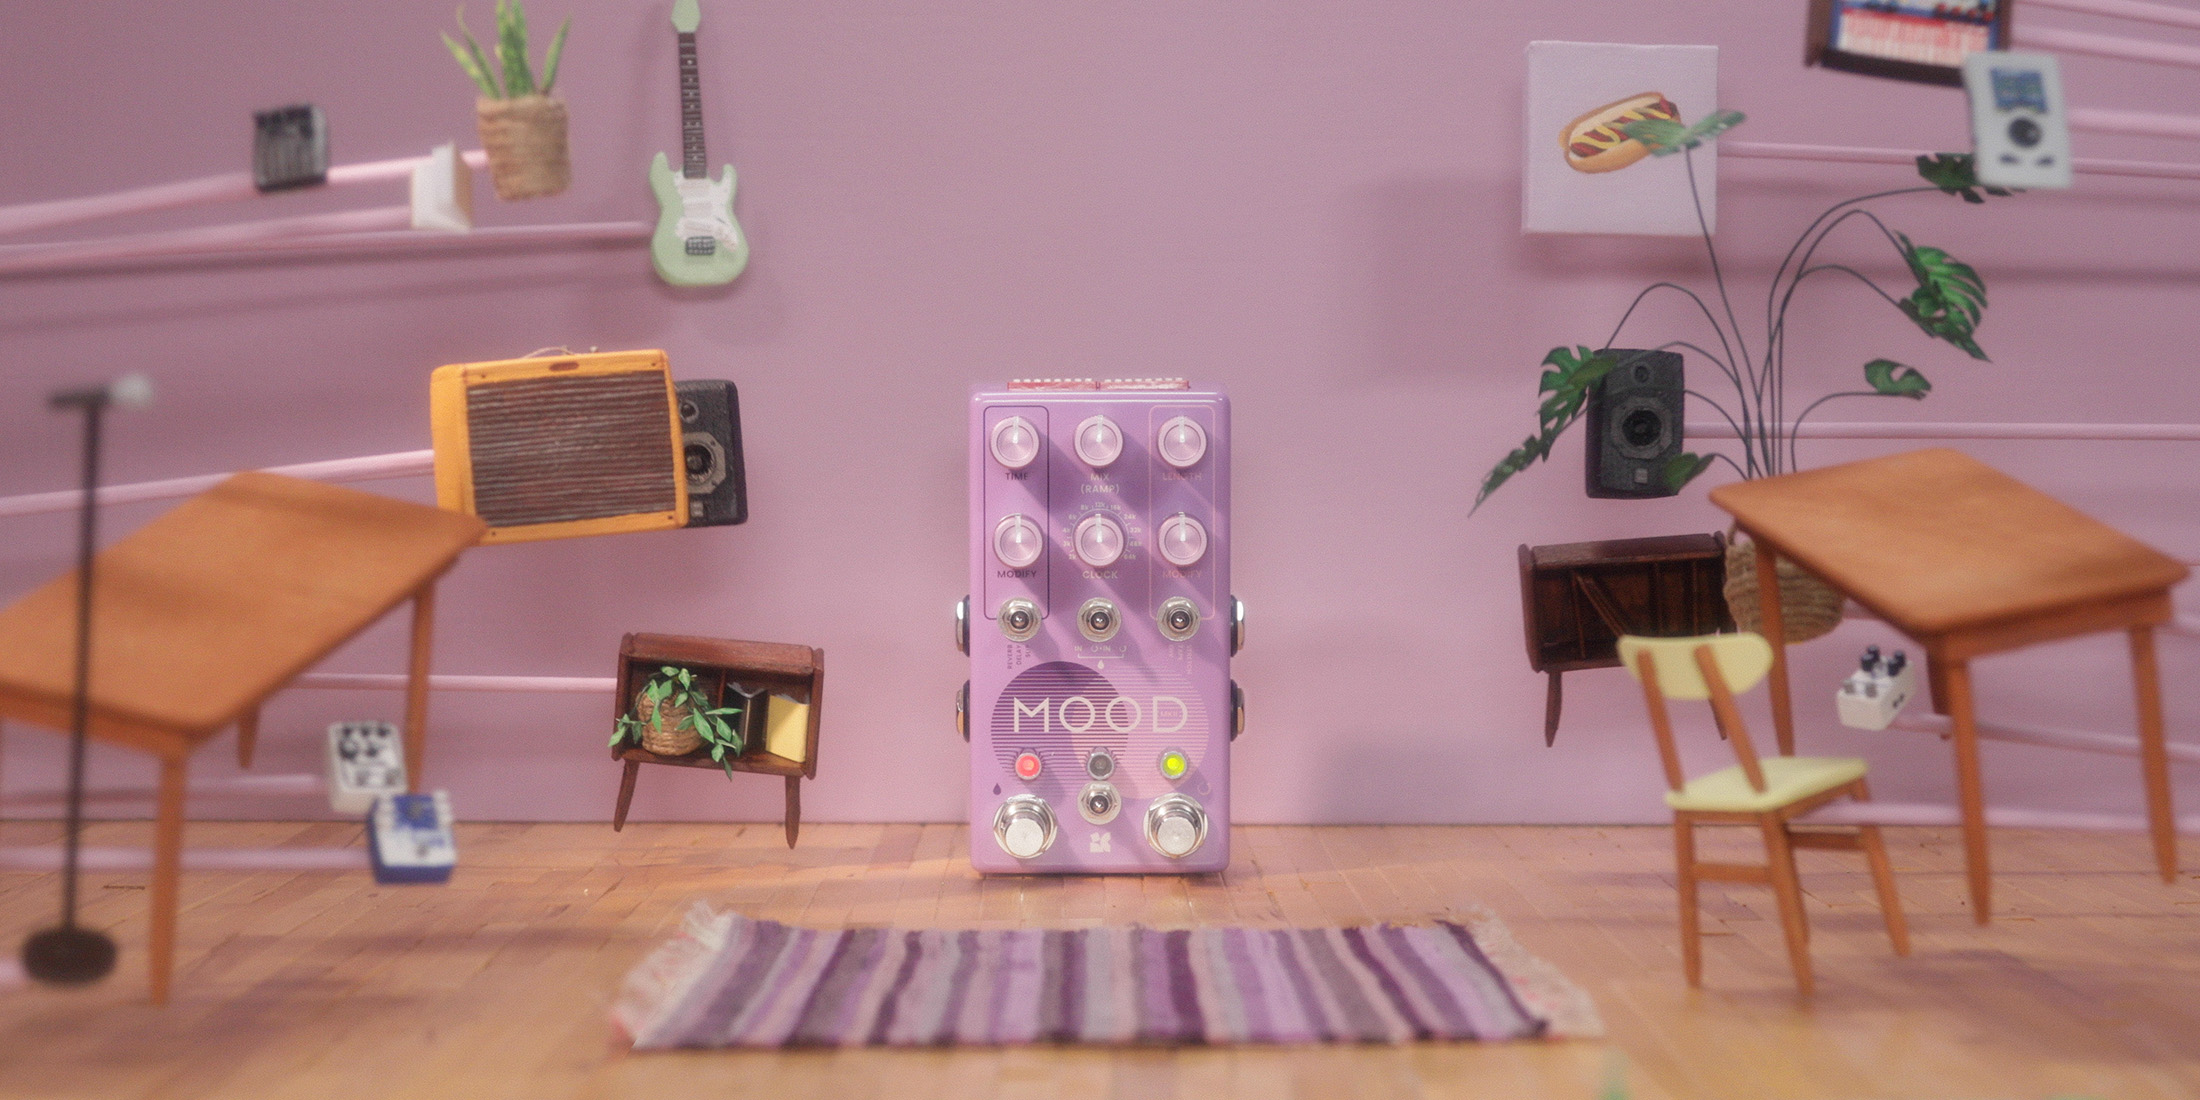 A pink guitar pedal is surrounded by miniature furniture and decor, including speakers, an amp and an electric guitar.